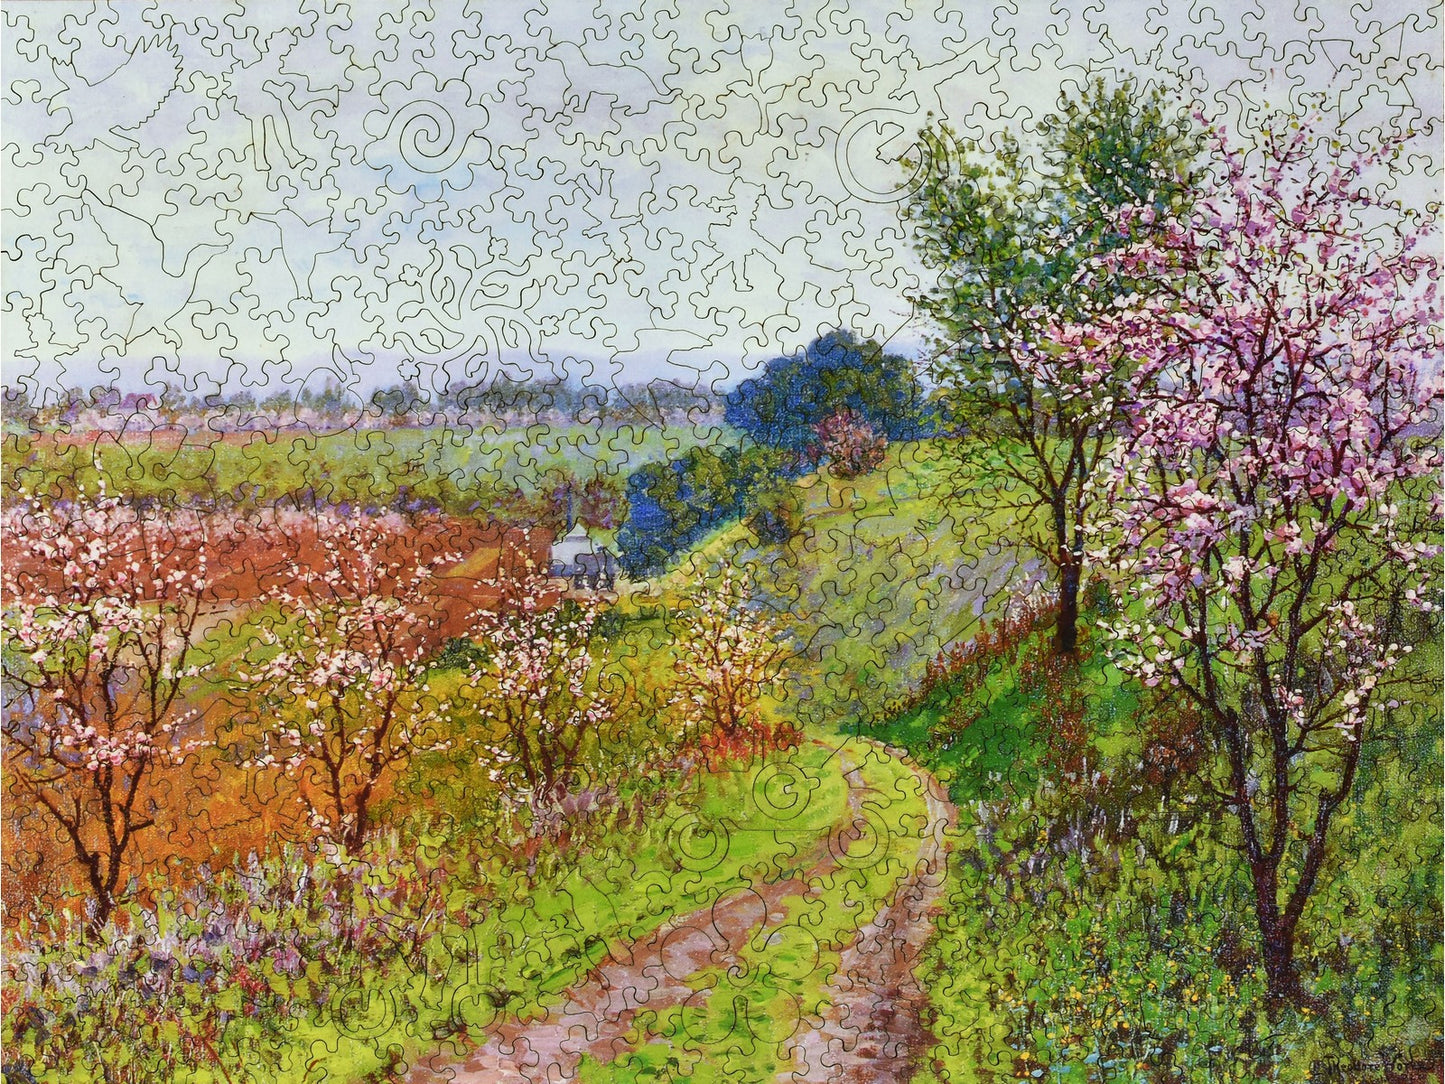 The front of the puzzle, Road with Blossoming Trees, which shows a road in the country during the spring.